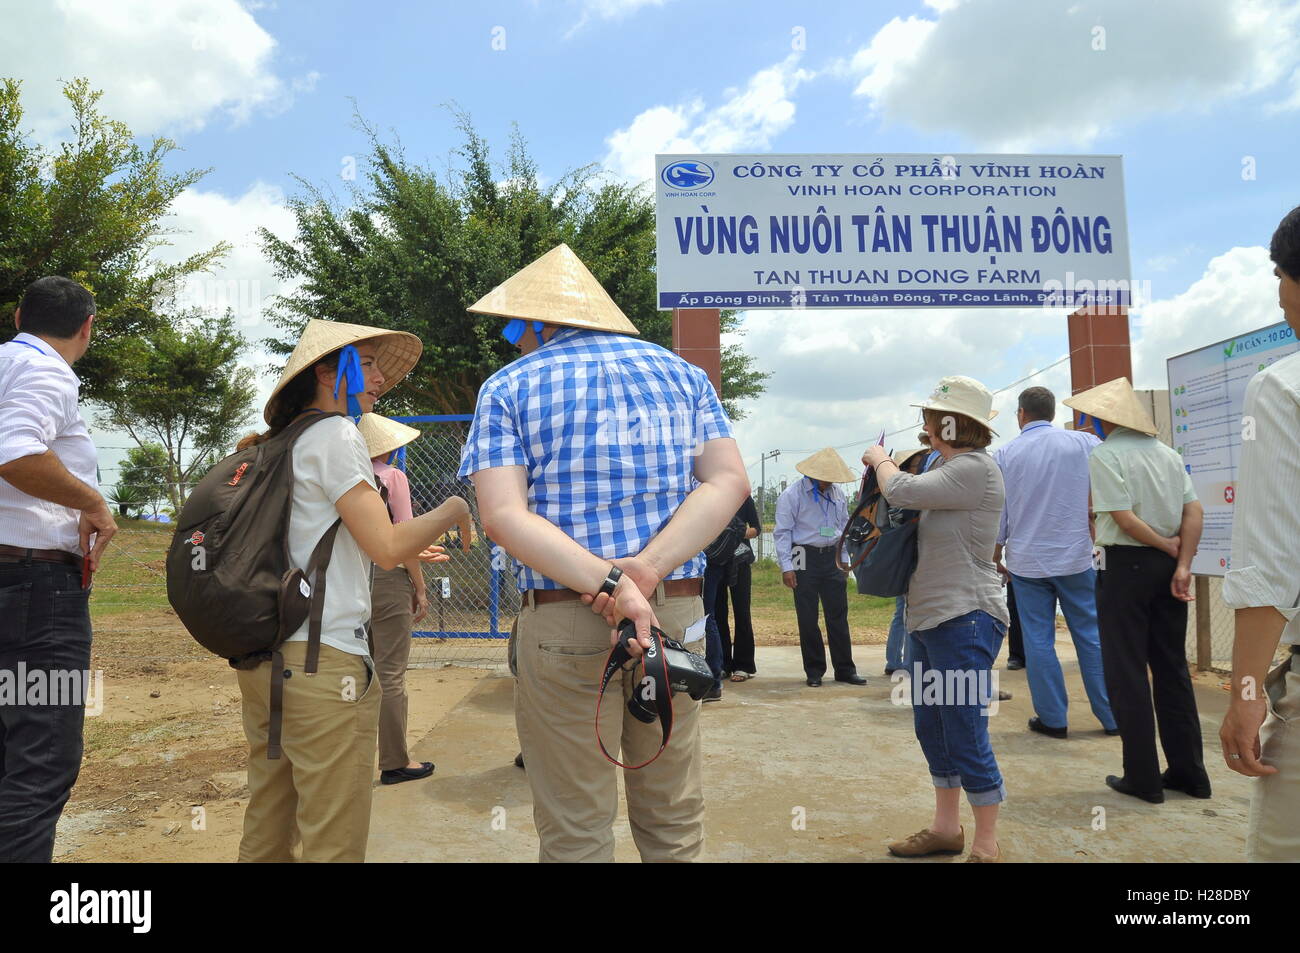 Dong Thap, Vietnam - March 1, 2013: International reporters and journalists are about to enter a pangasius catfish farm in the m Stock Photo